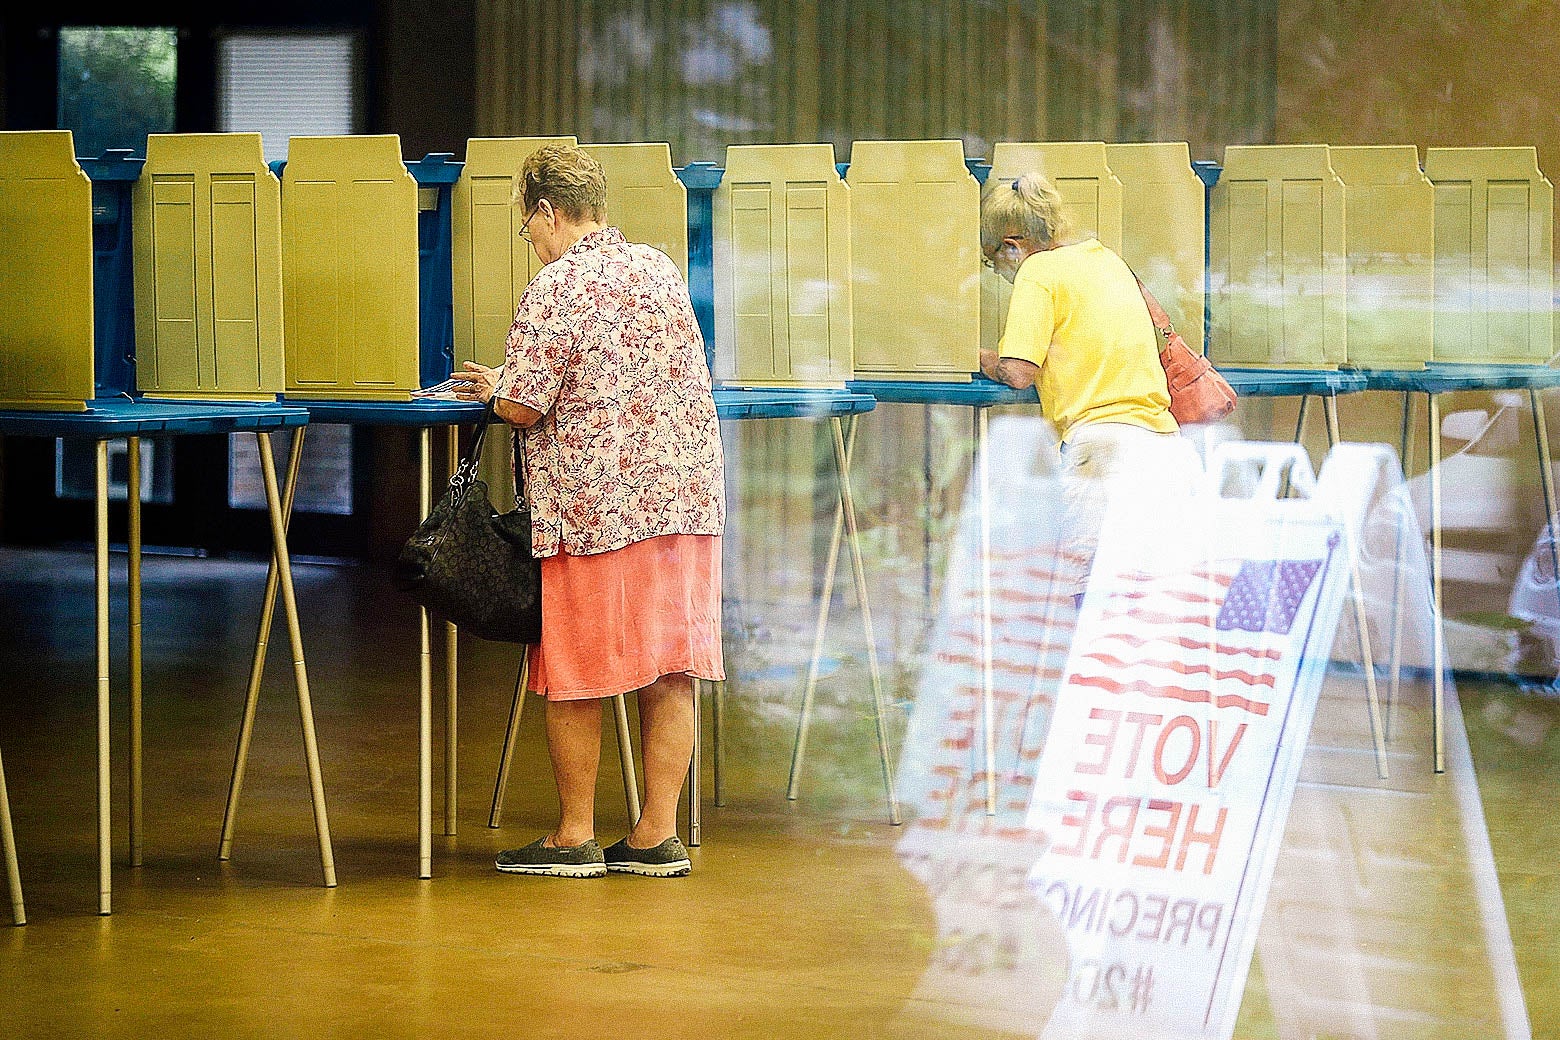 Voters stand at voting booths.